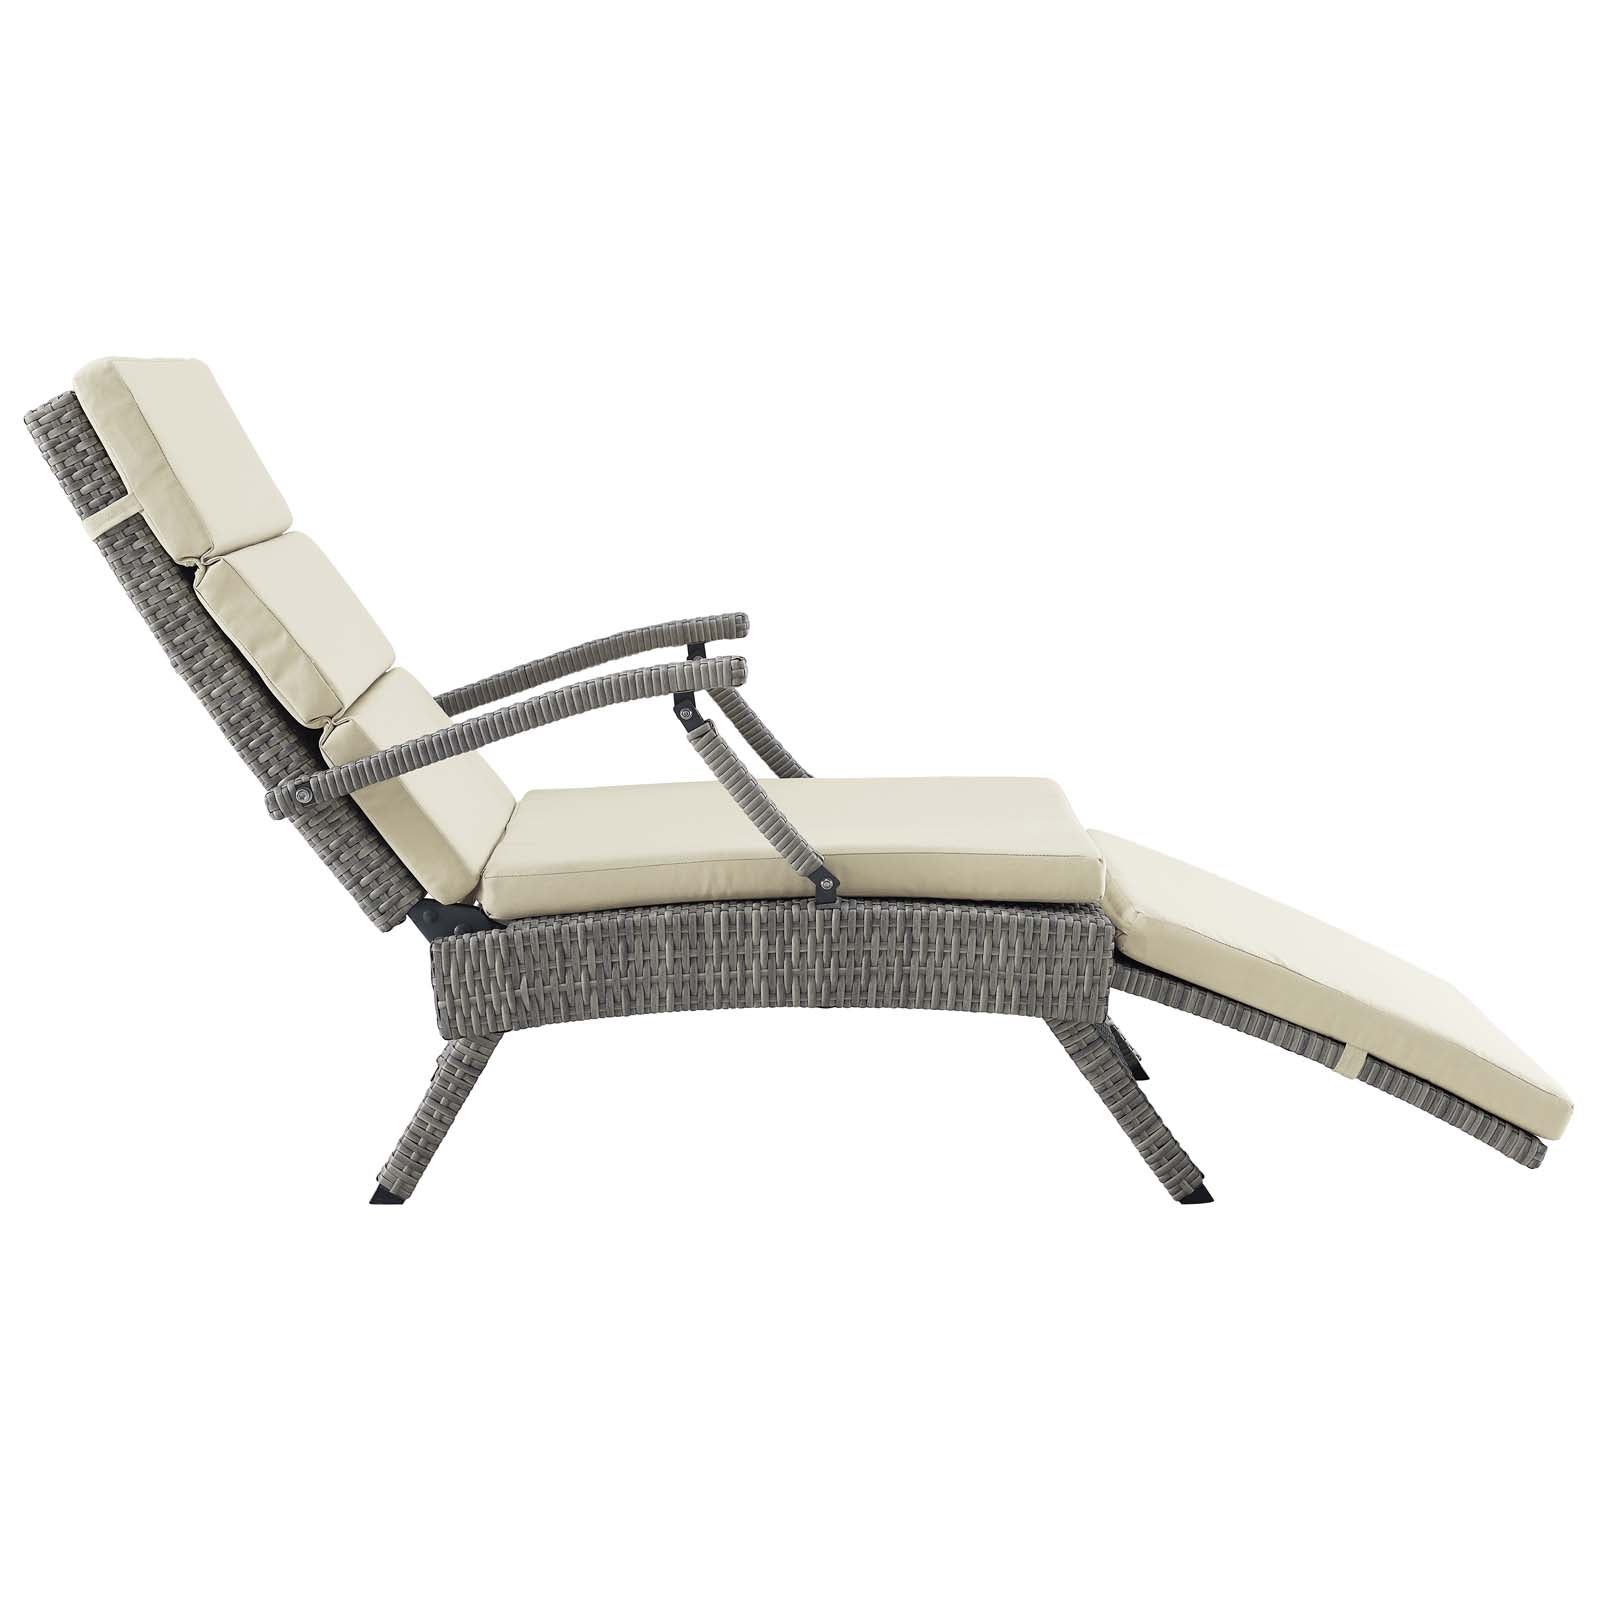 Modway Outdoor Loungers - Envisage Chaise Outdoor Patio Wicker Rattan Lounge Chair Light Gray Beige